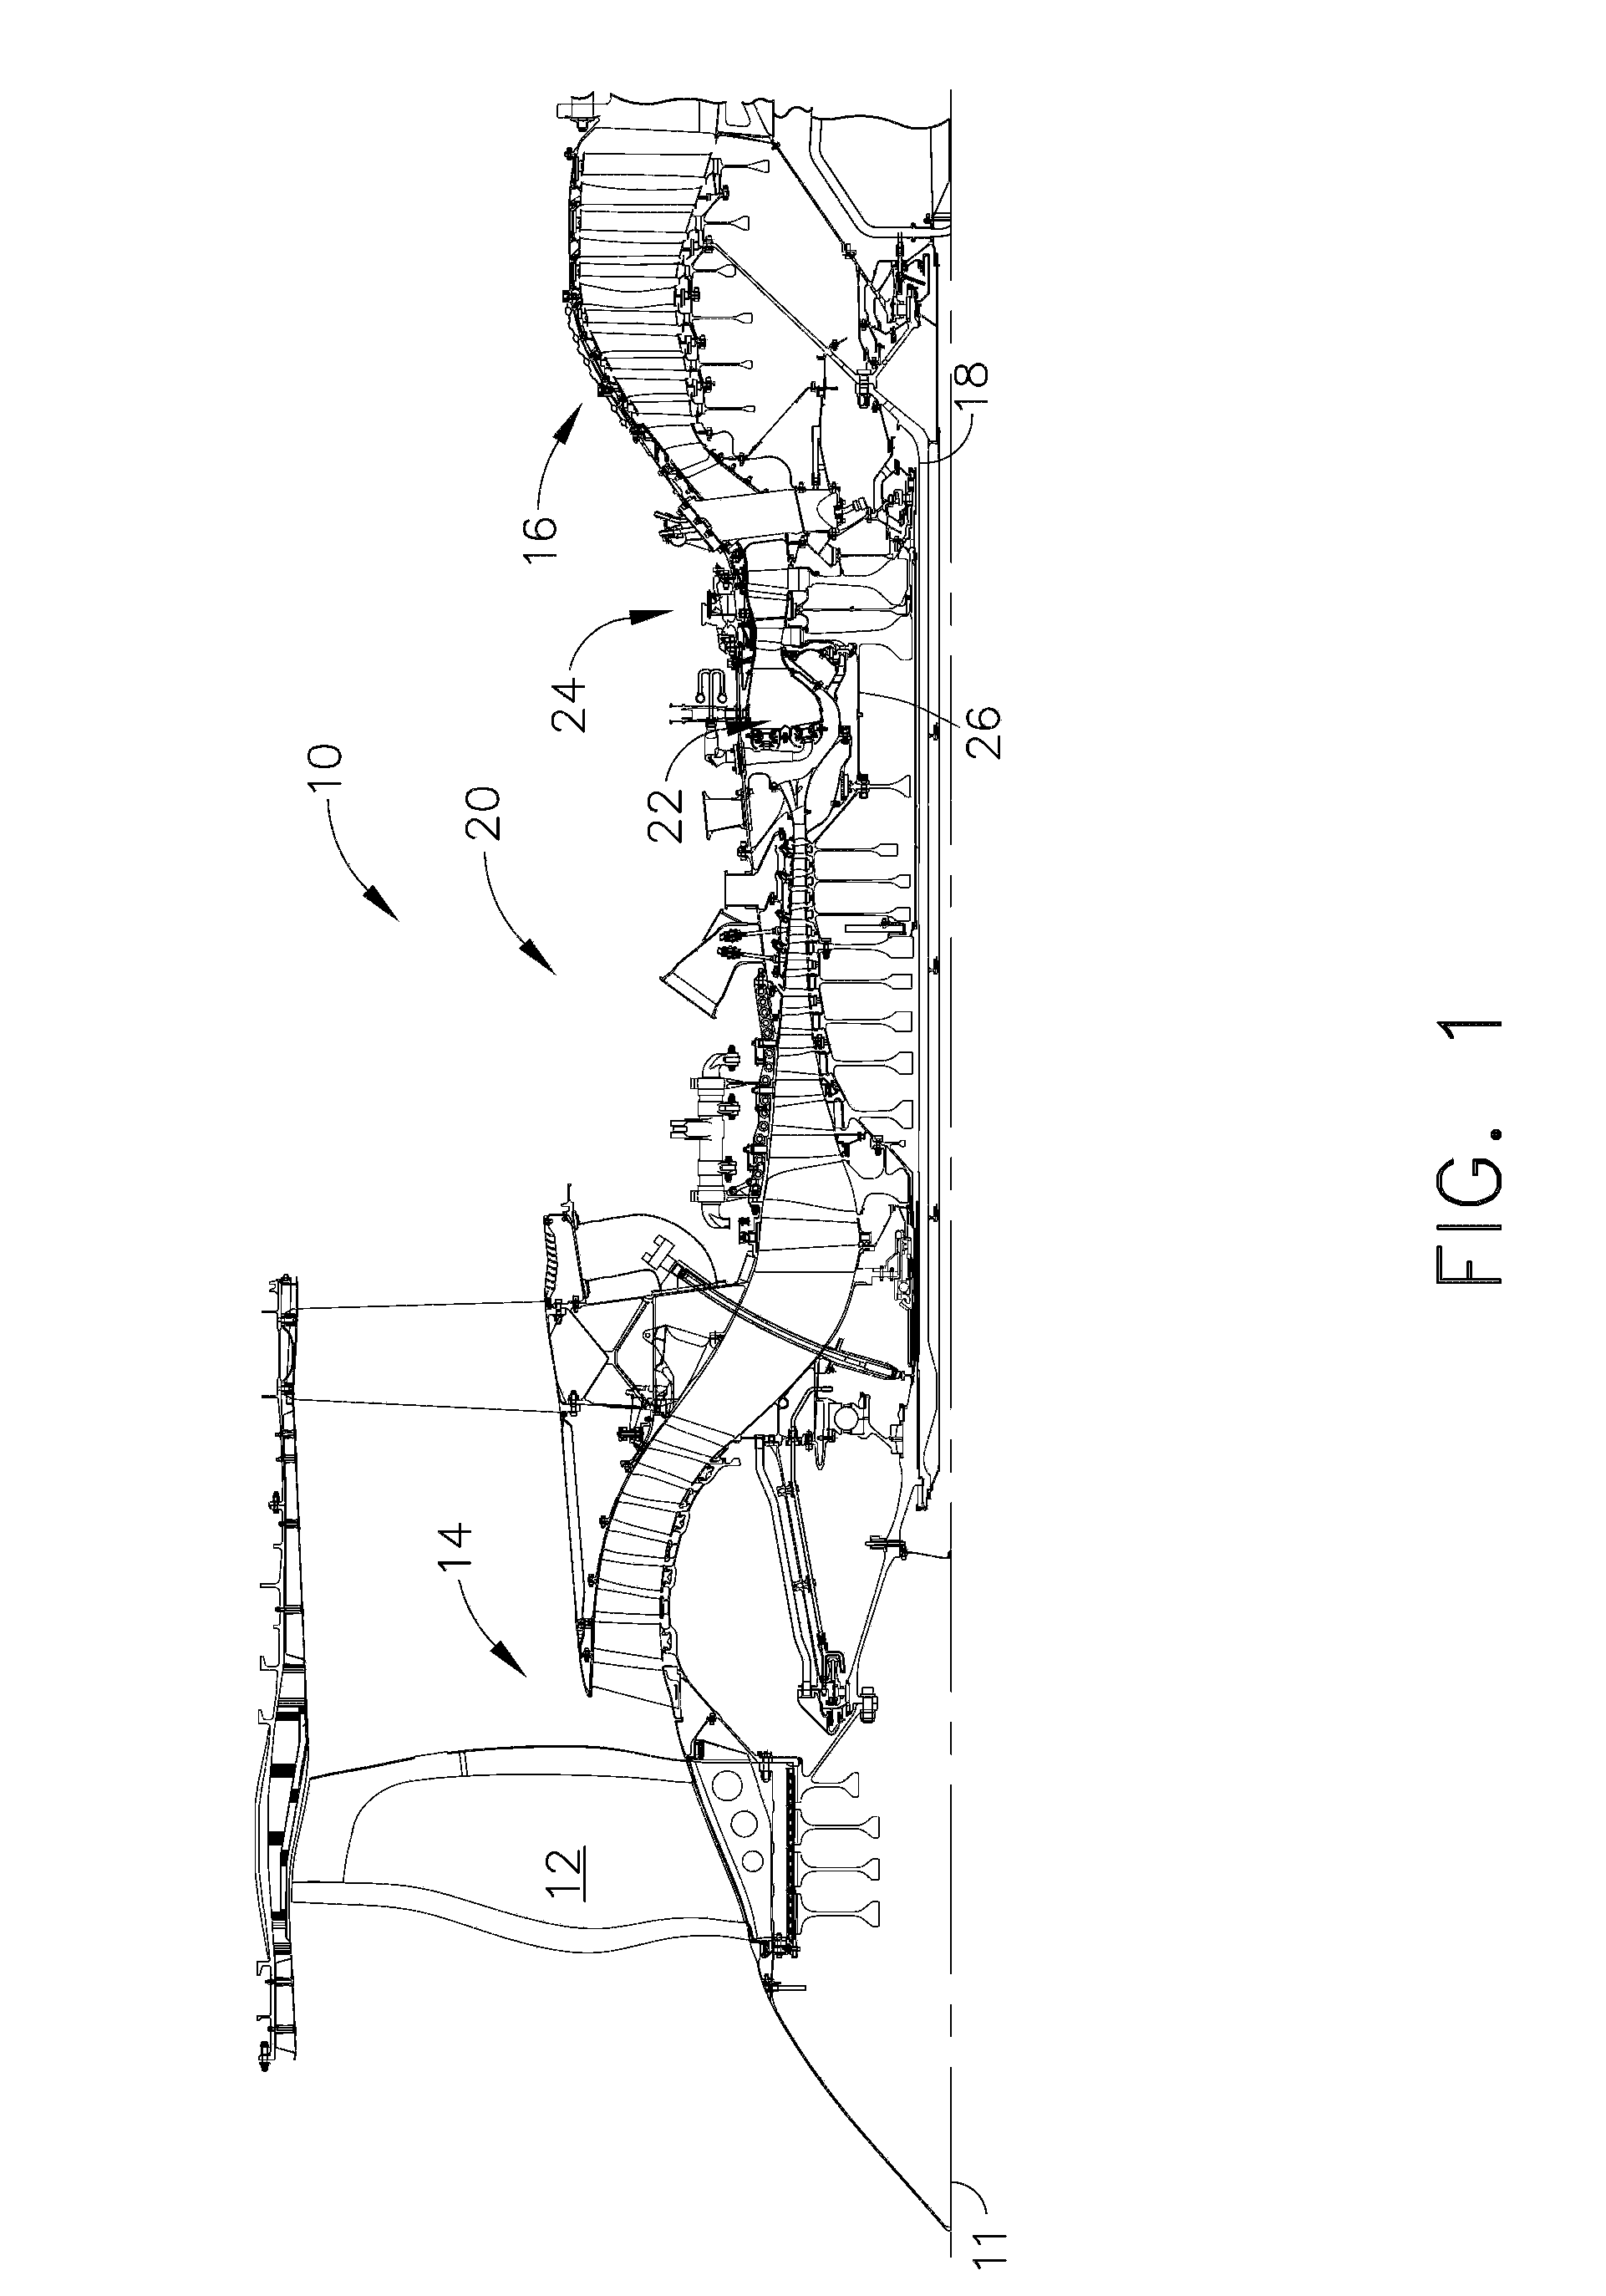 Series bearing support apparatus for a gas turbine engine